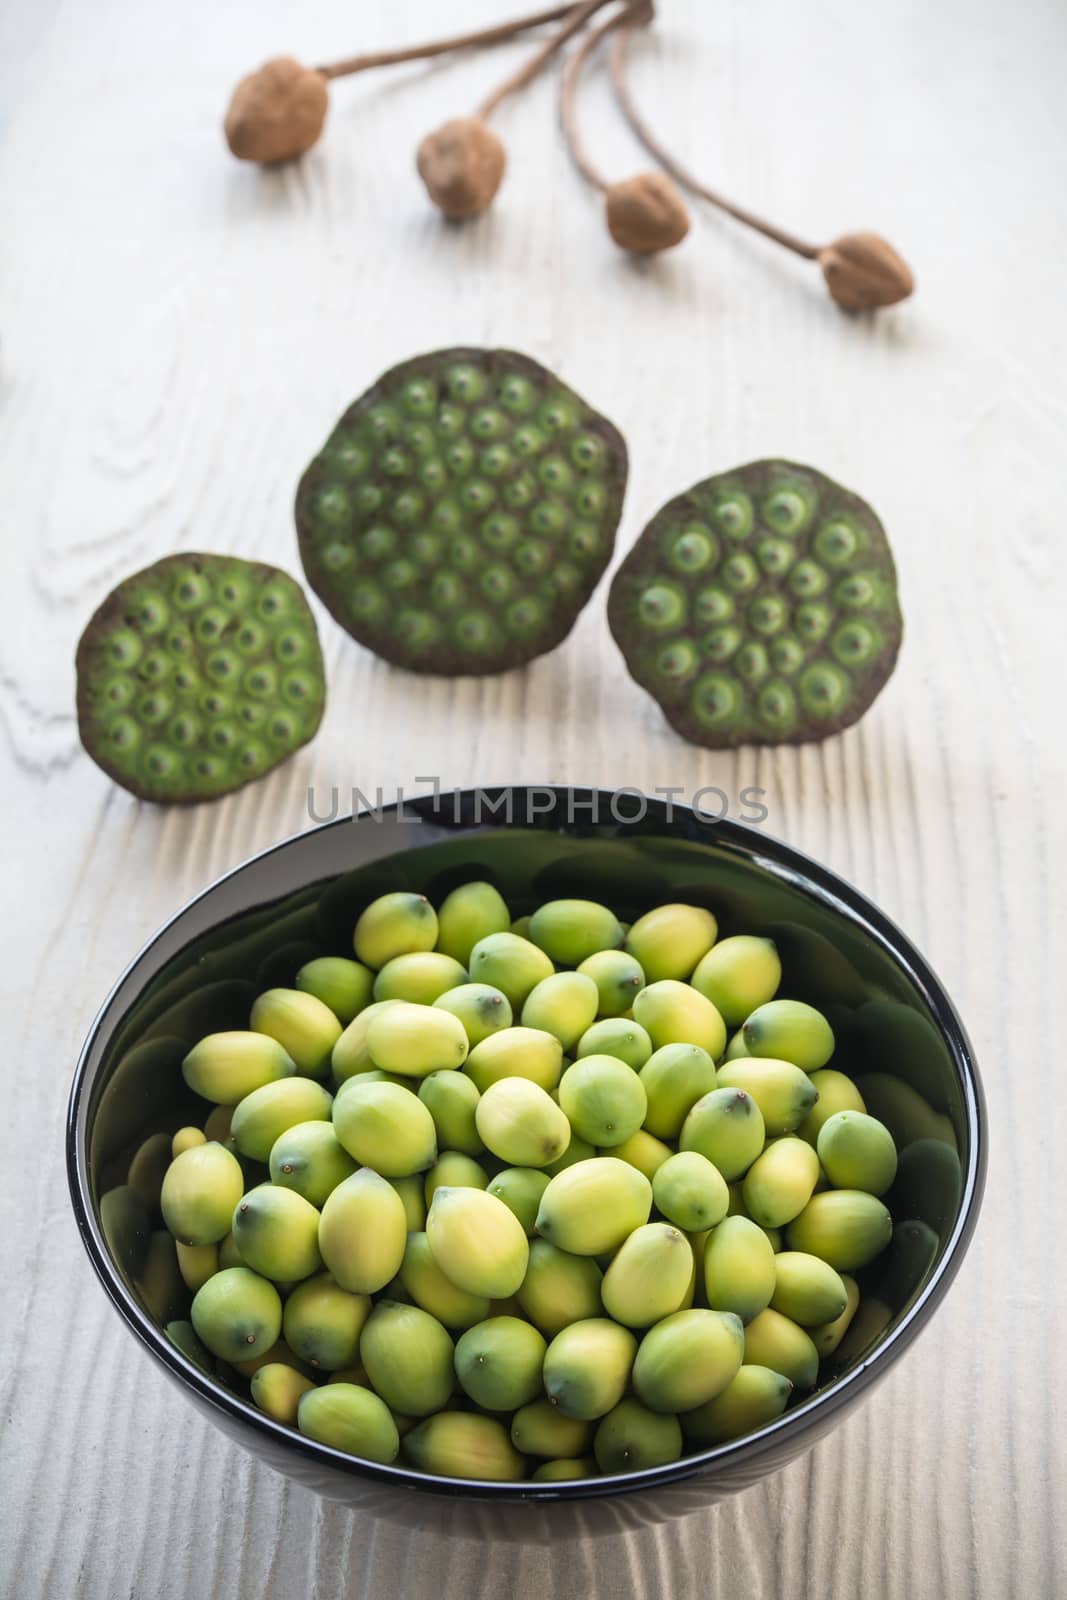 young lotus seeds in black bowl, eaten as snack in local Thailand